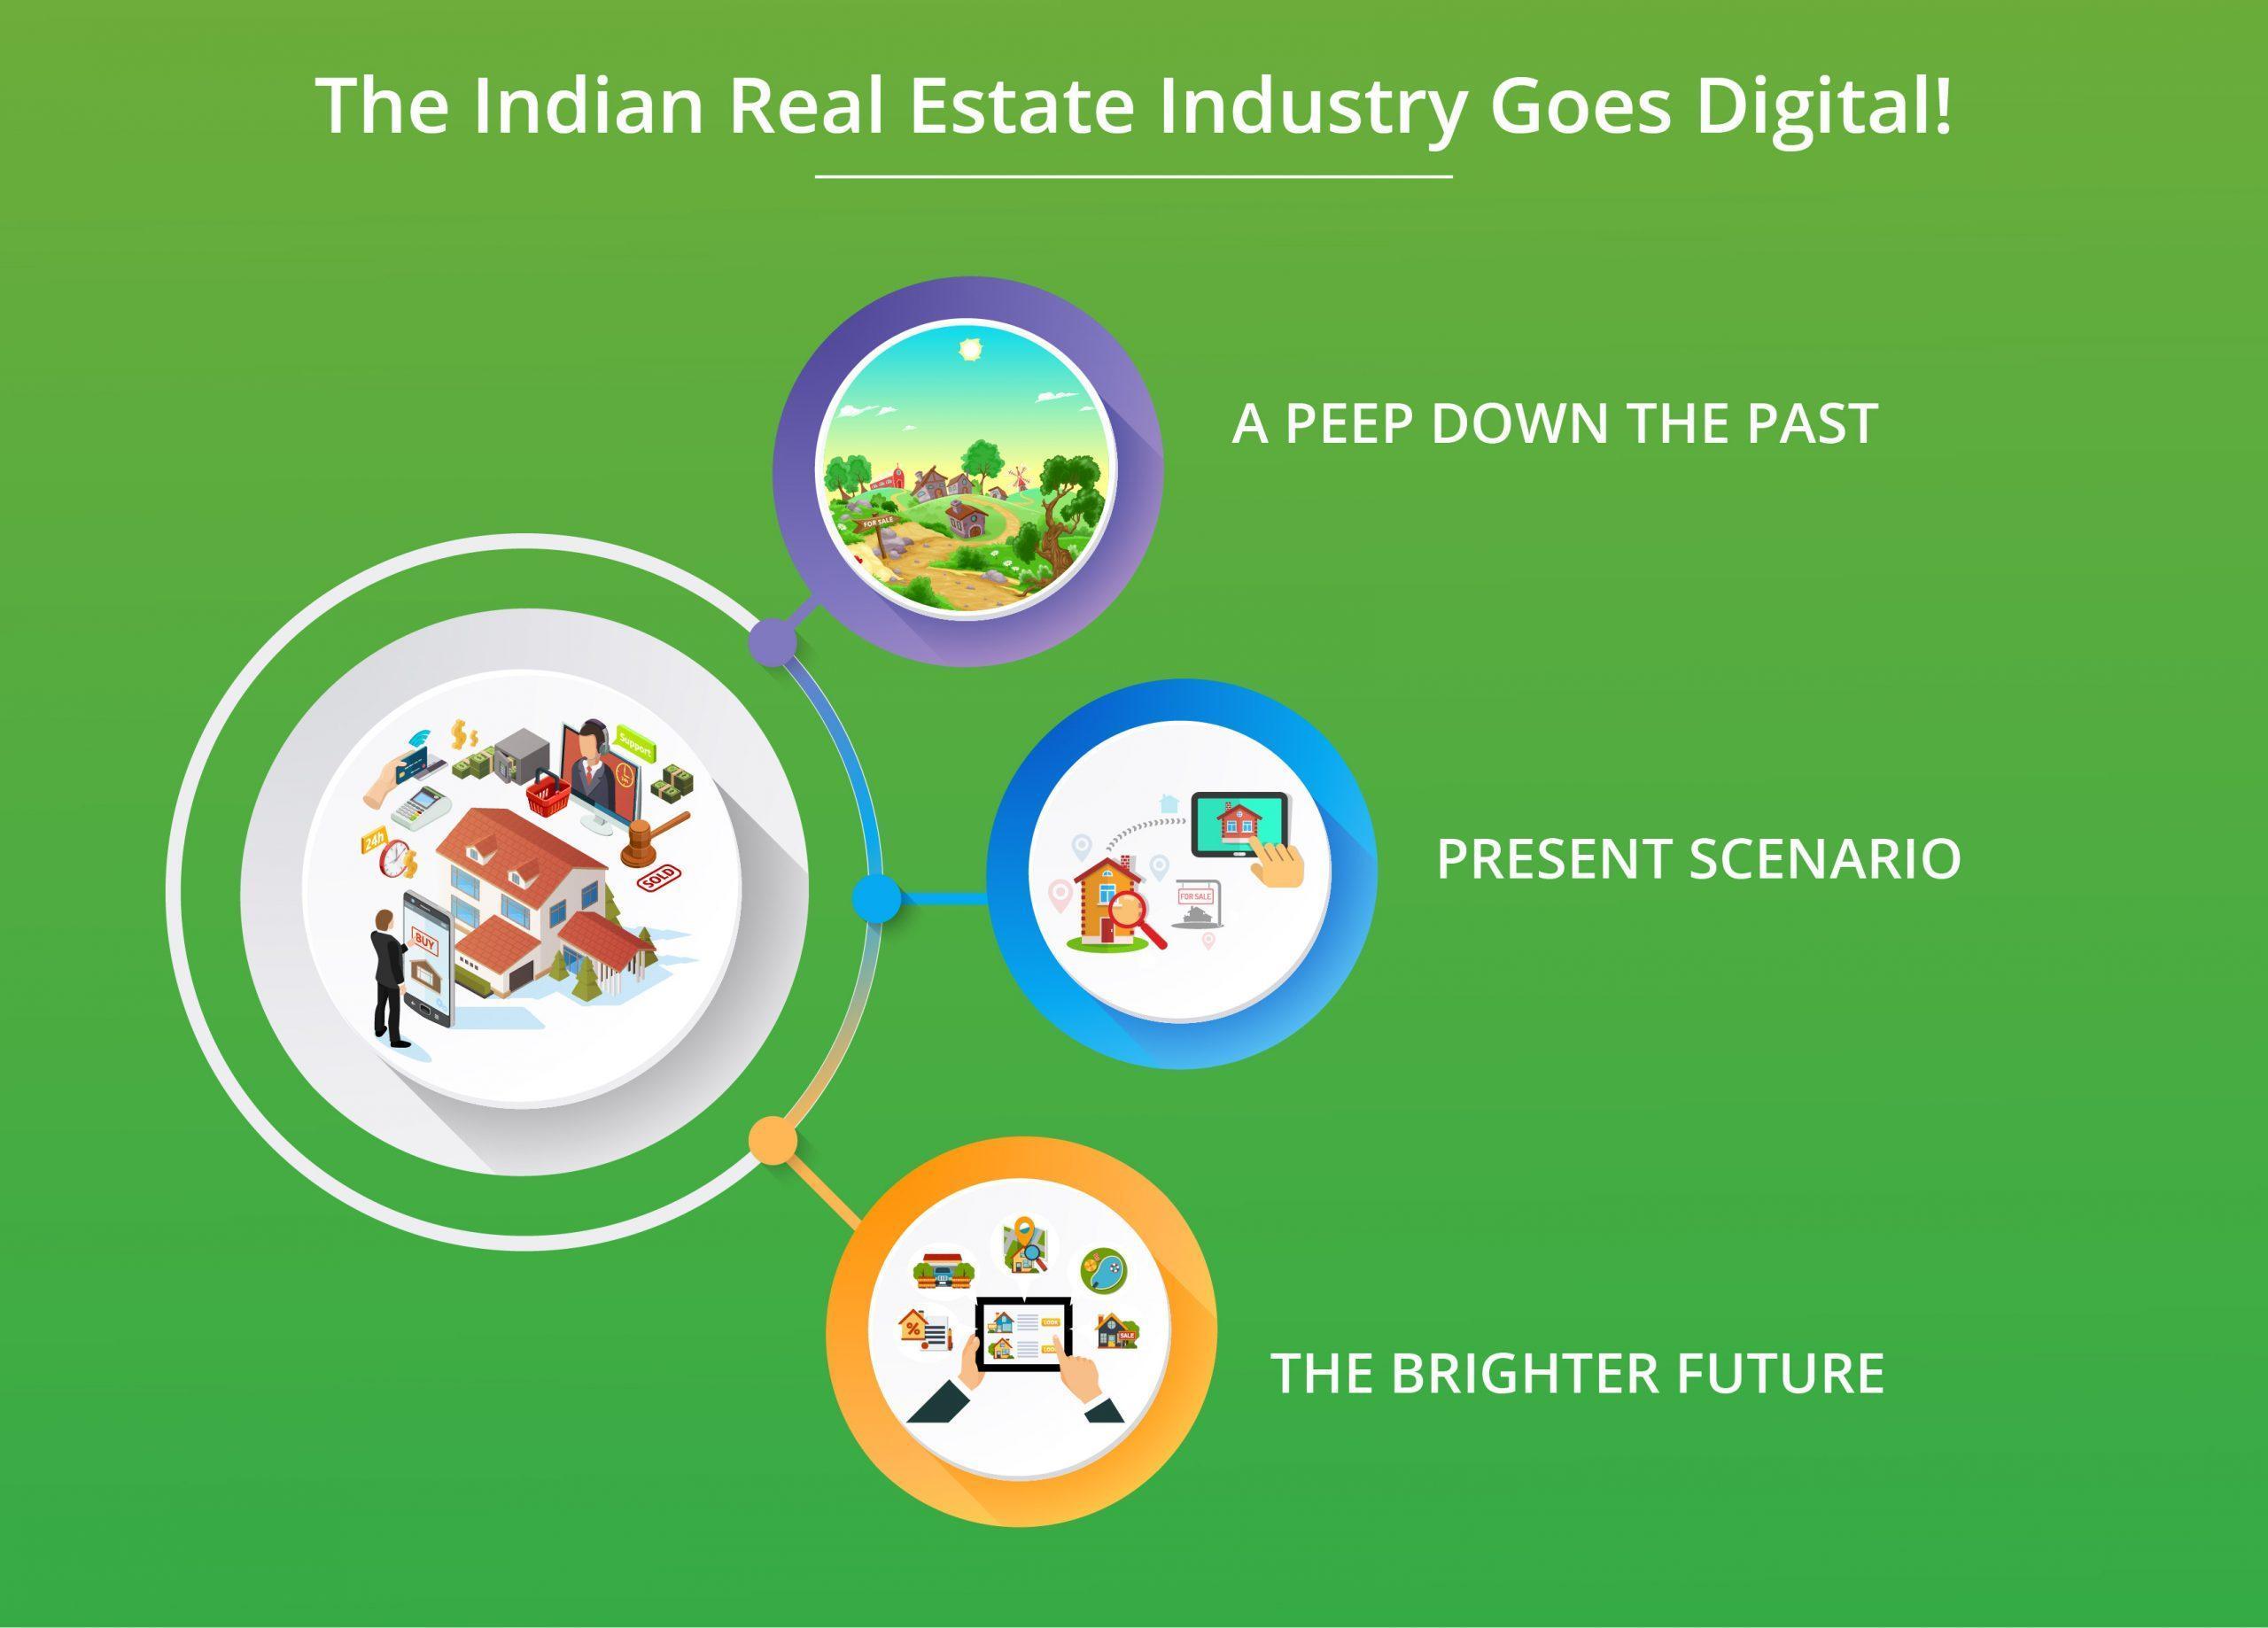 The Indian real estate industry goes digital!